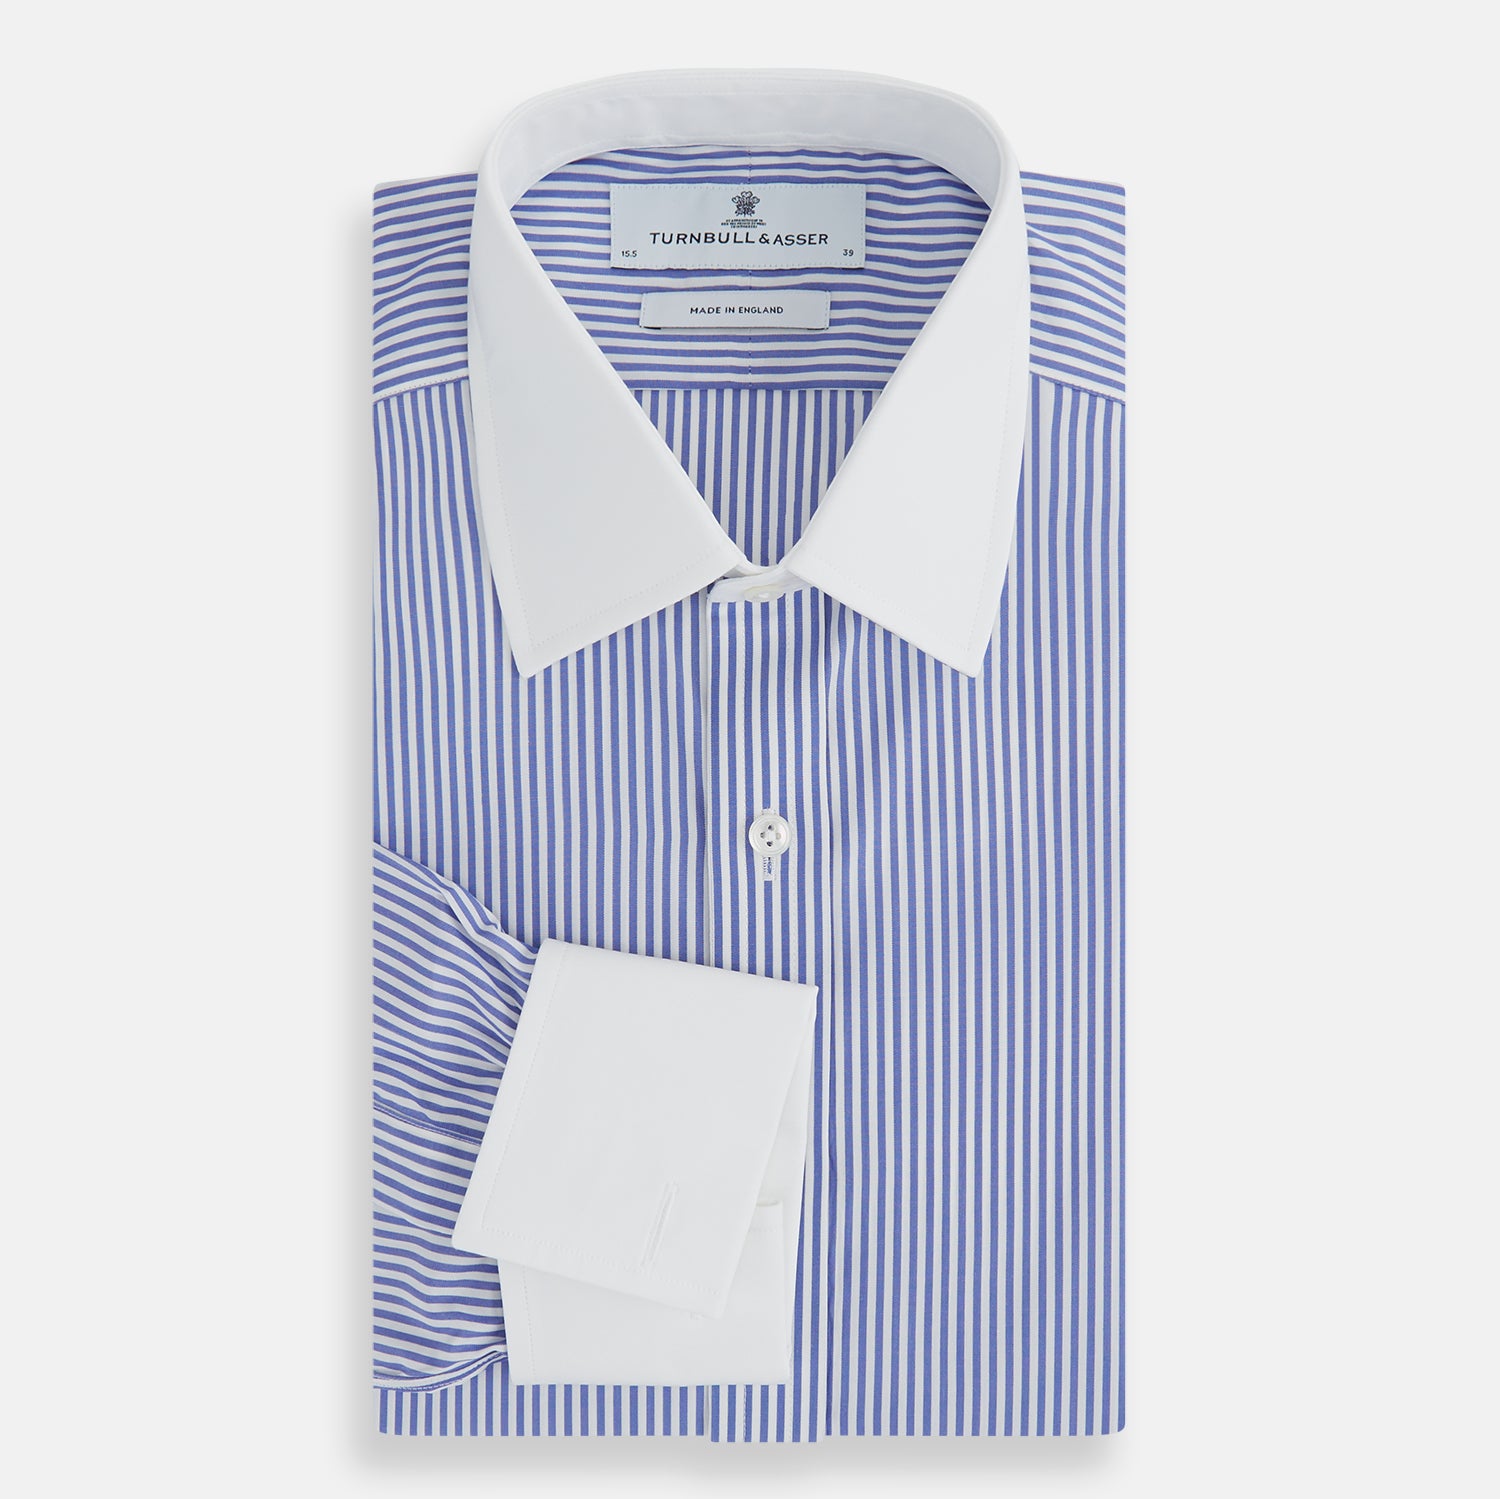 Mid-Blue Gingham Check Shirt with T&A Collar and 3-Button Cuffs